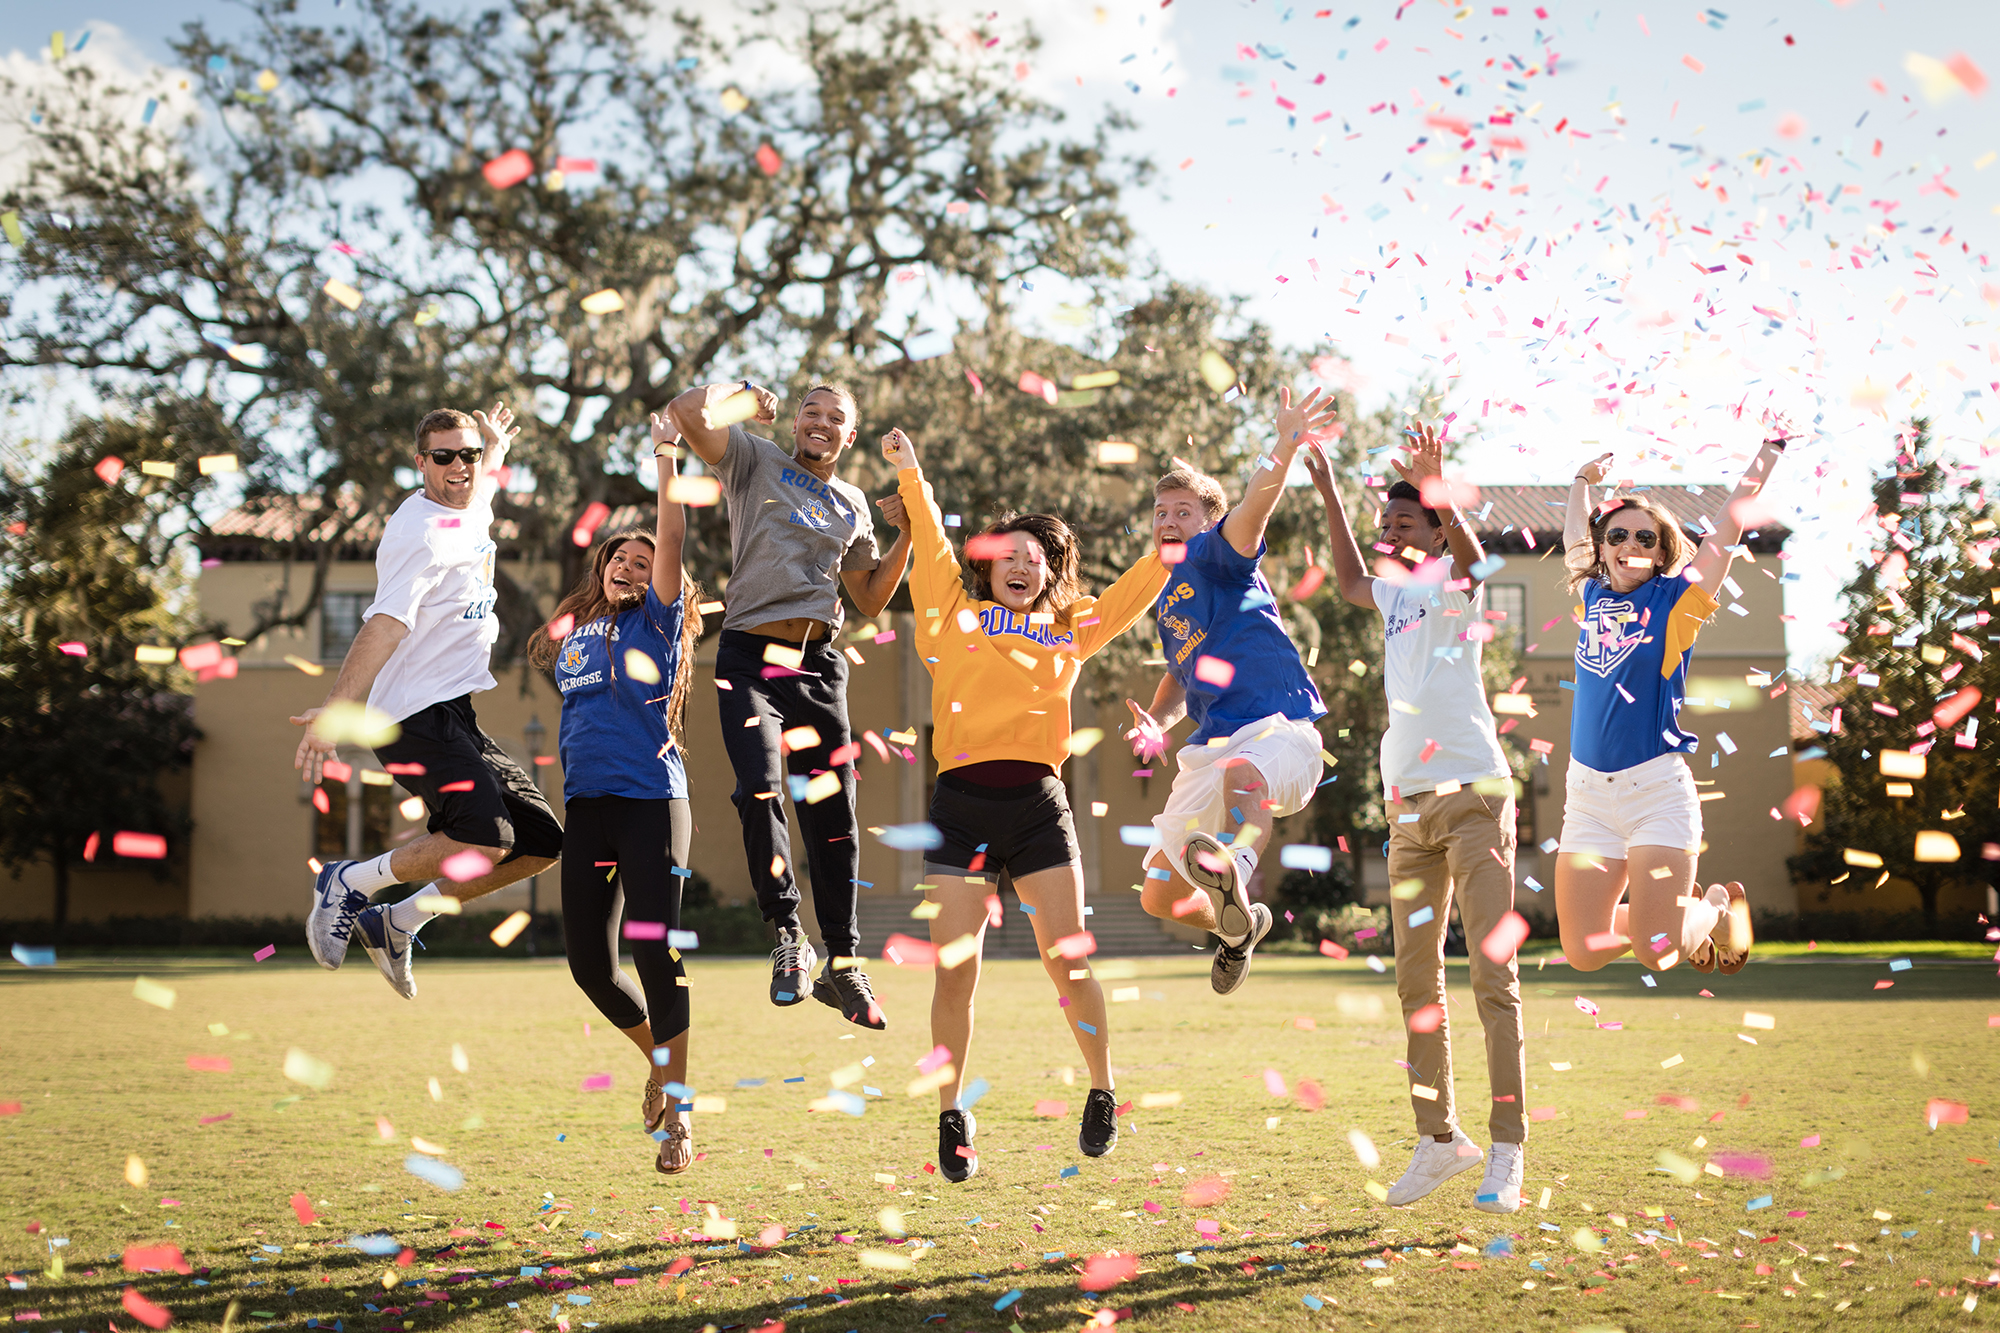 Rollins students jump for joy on America’s most beautiful campus.